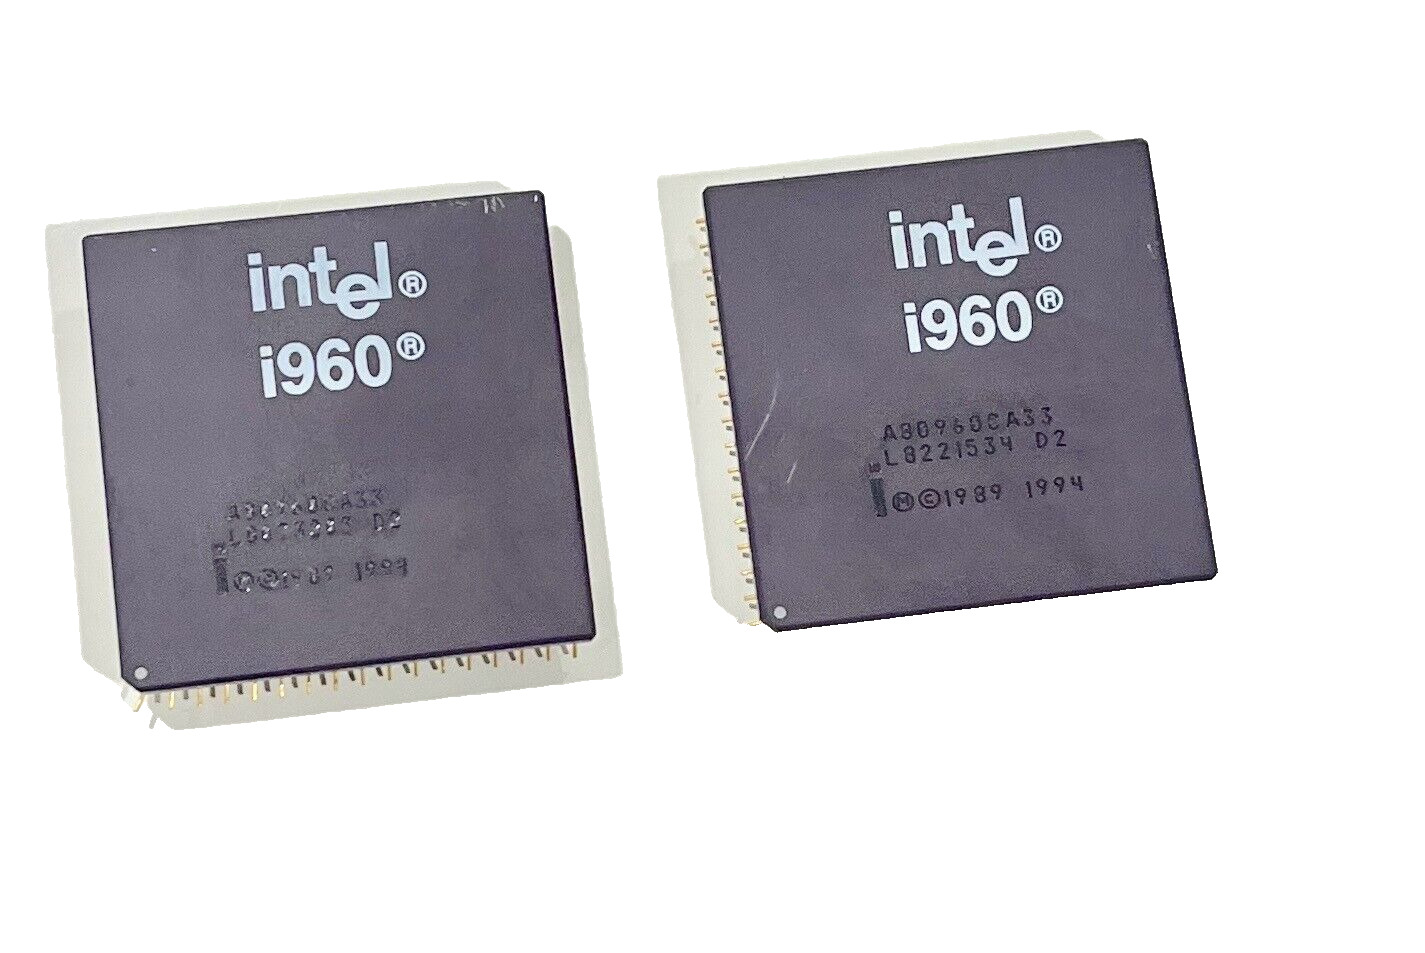 (2) - Vintage Rare Intel i960 A80960CA33 Processor Collection or Gold Recovery